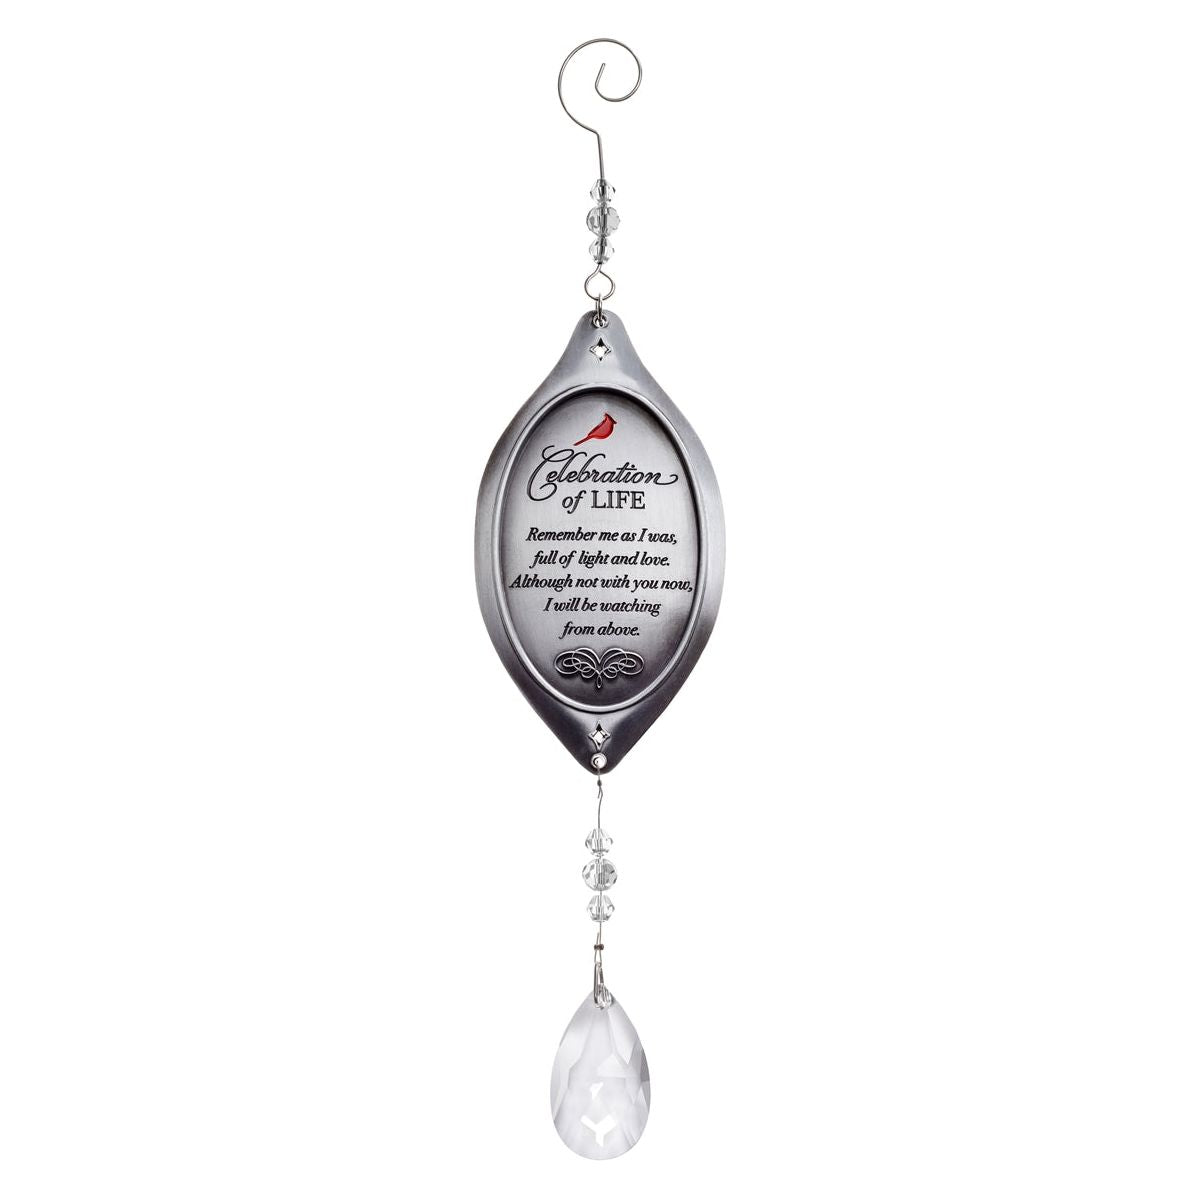 Celebration of Life Memorial Ornament- Cast metal top engraved with "Celebration of Life" sentiment and crystal pendent